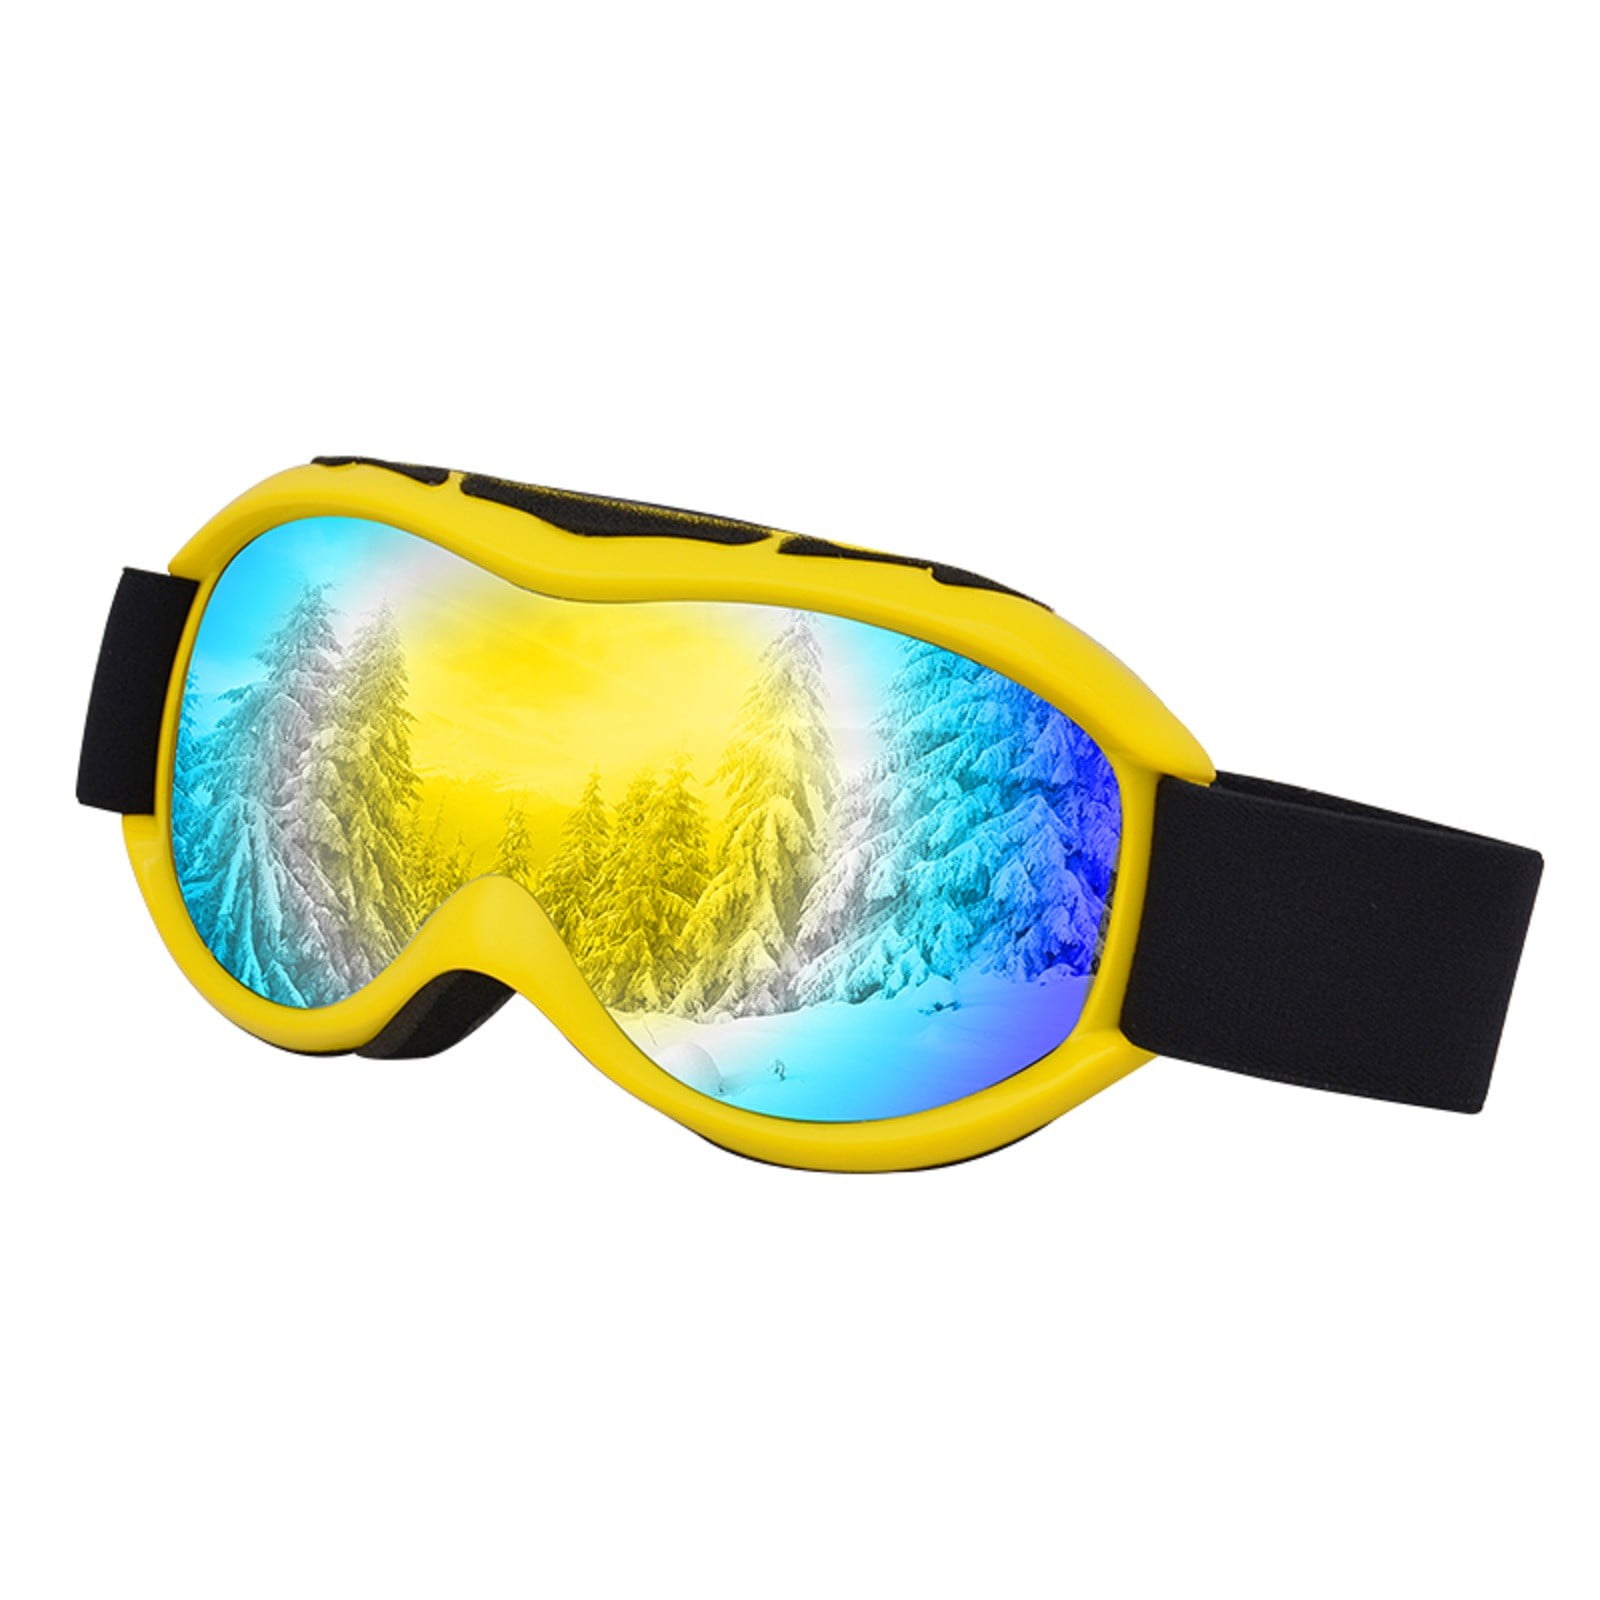 Details about   Ski Goggles Double Layers Anti-fog Uv 400 Glasses Skiing Snowboard Skateboard 